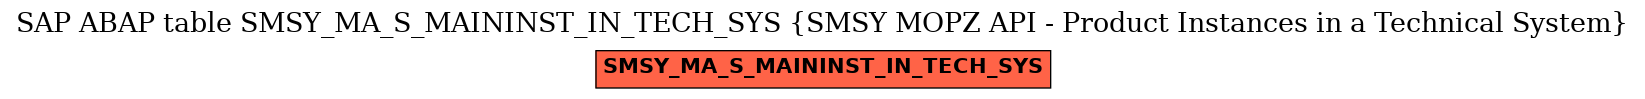 E-R Diagram for table SMSY_MA_S_MAININST_IN_TECH_SYS (SMSY MOPZ API - Product Instances in a Technical System)